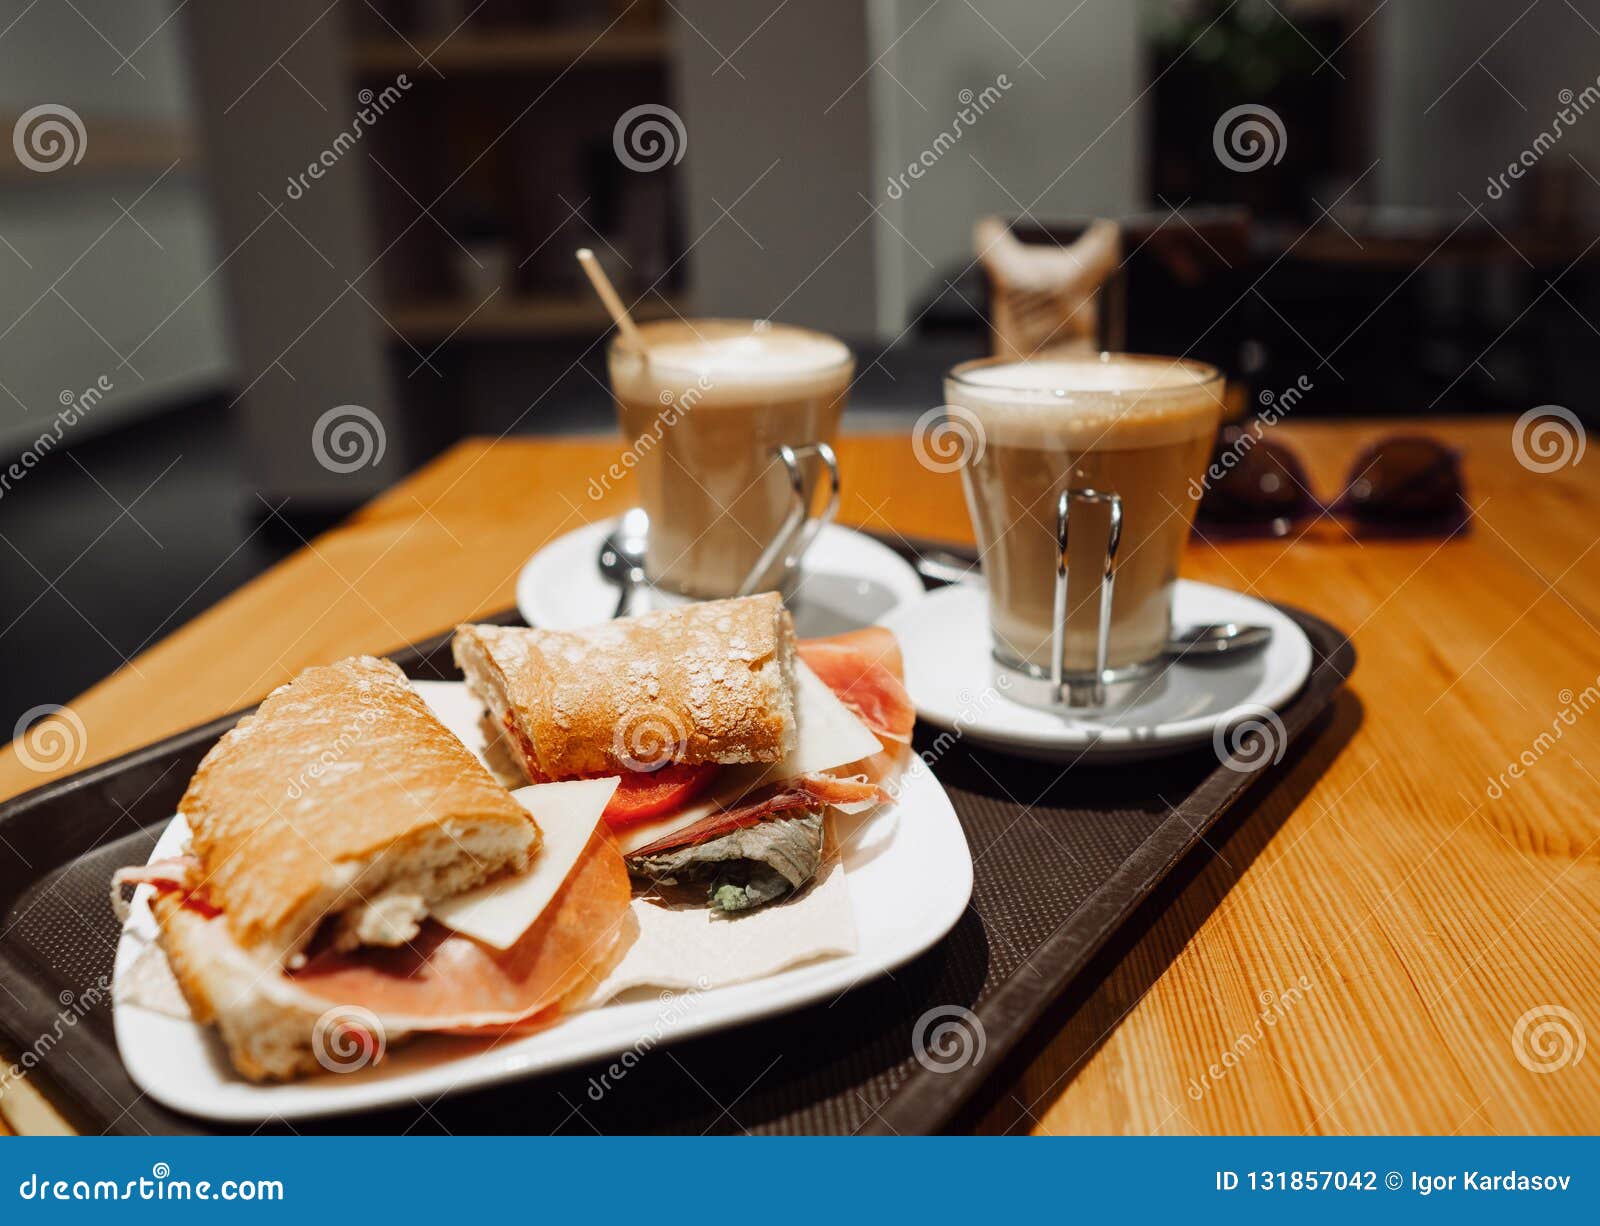 breakfest snack - coffee latte and bocadillo sandwich on table in one cafe